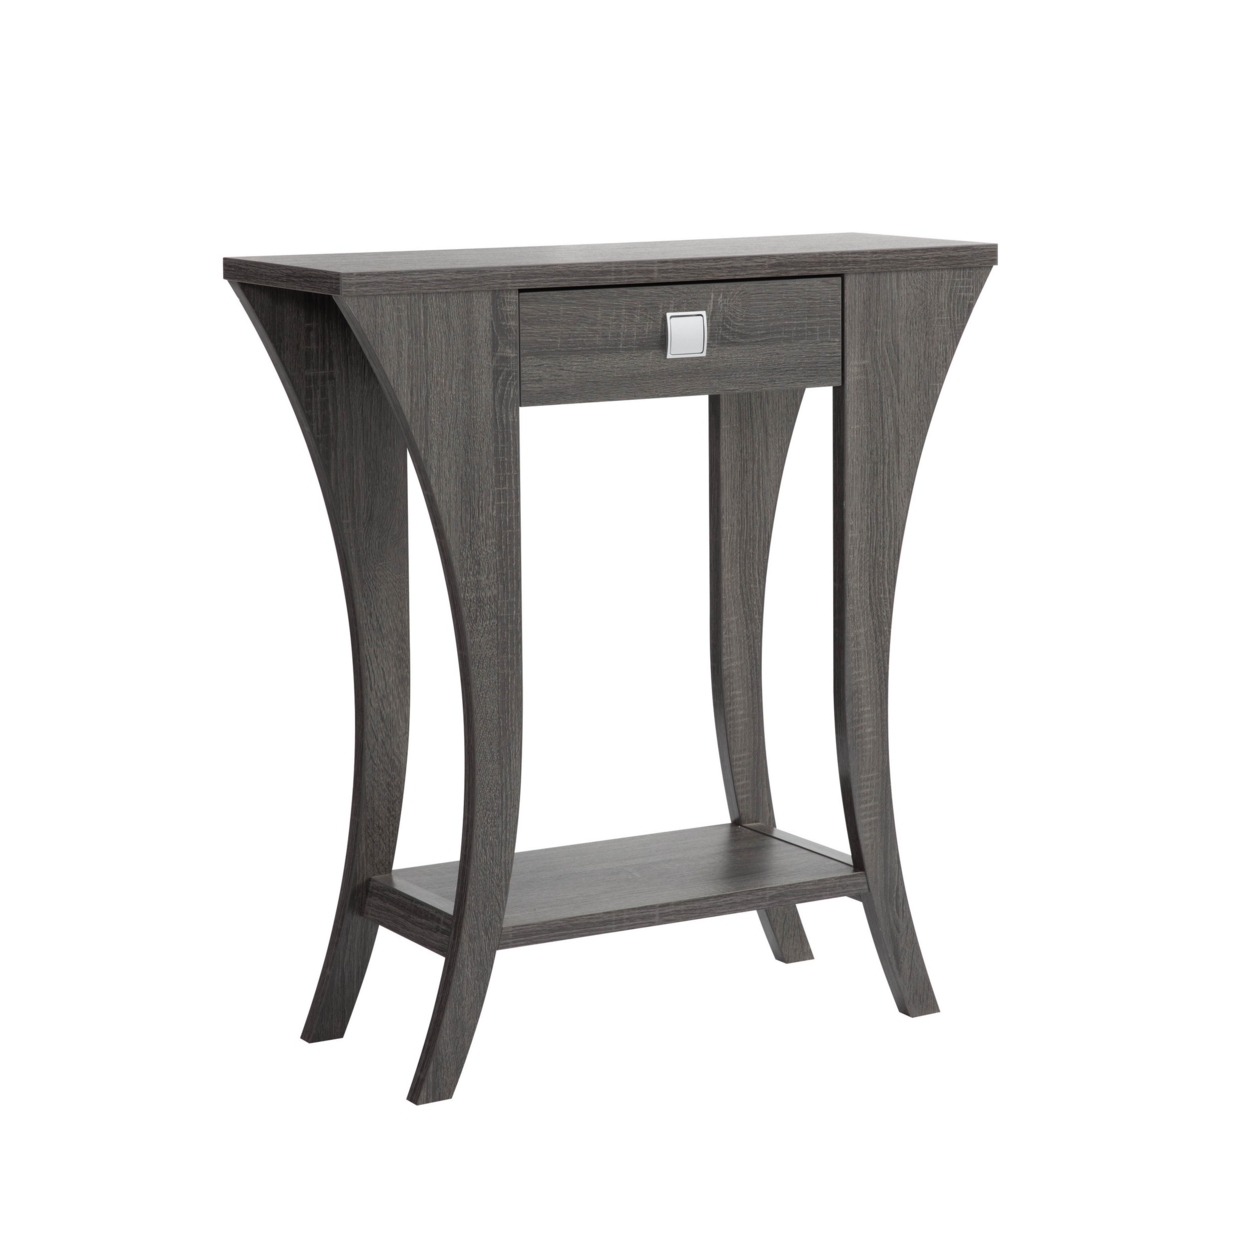 34 Inch Console Table With Drawer And Shelf, Curved Legs, Distressed Gray - Saltoro Sherpi